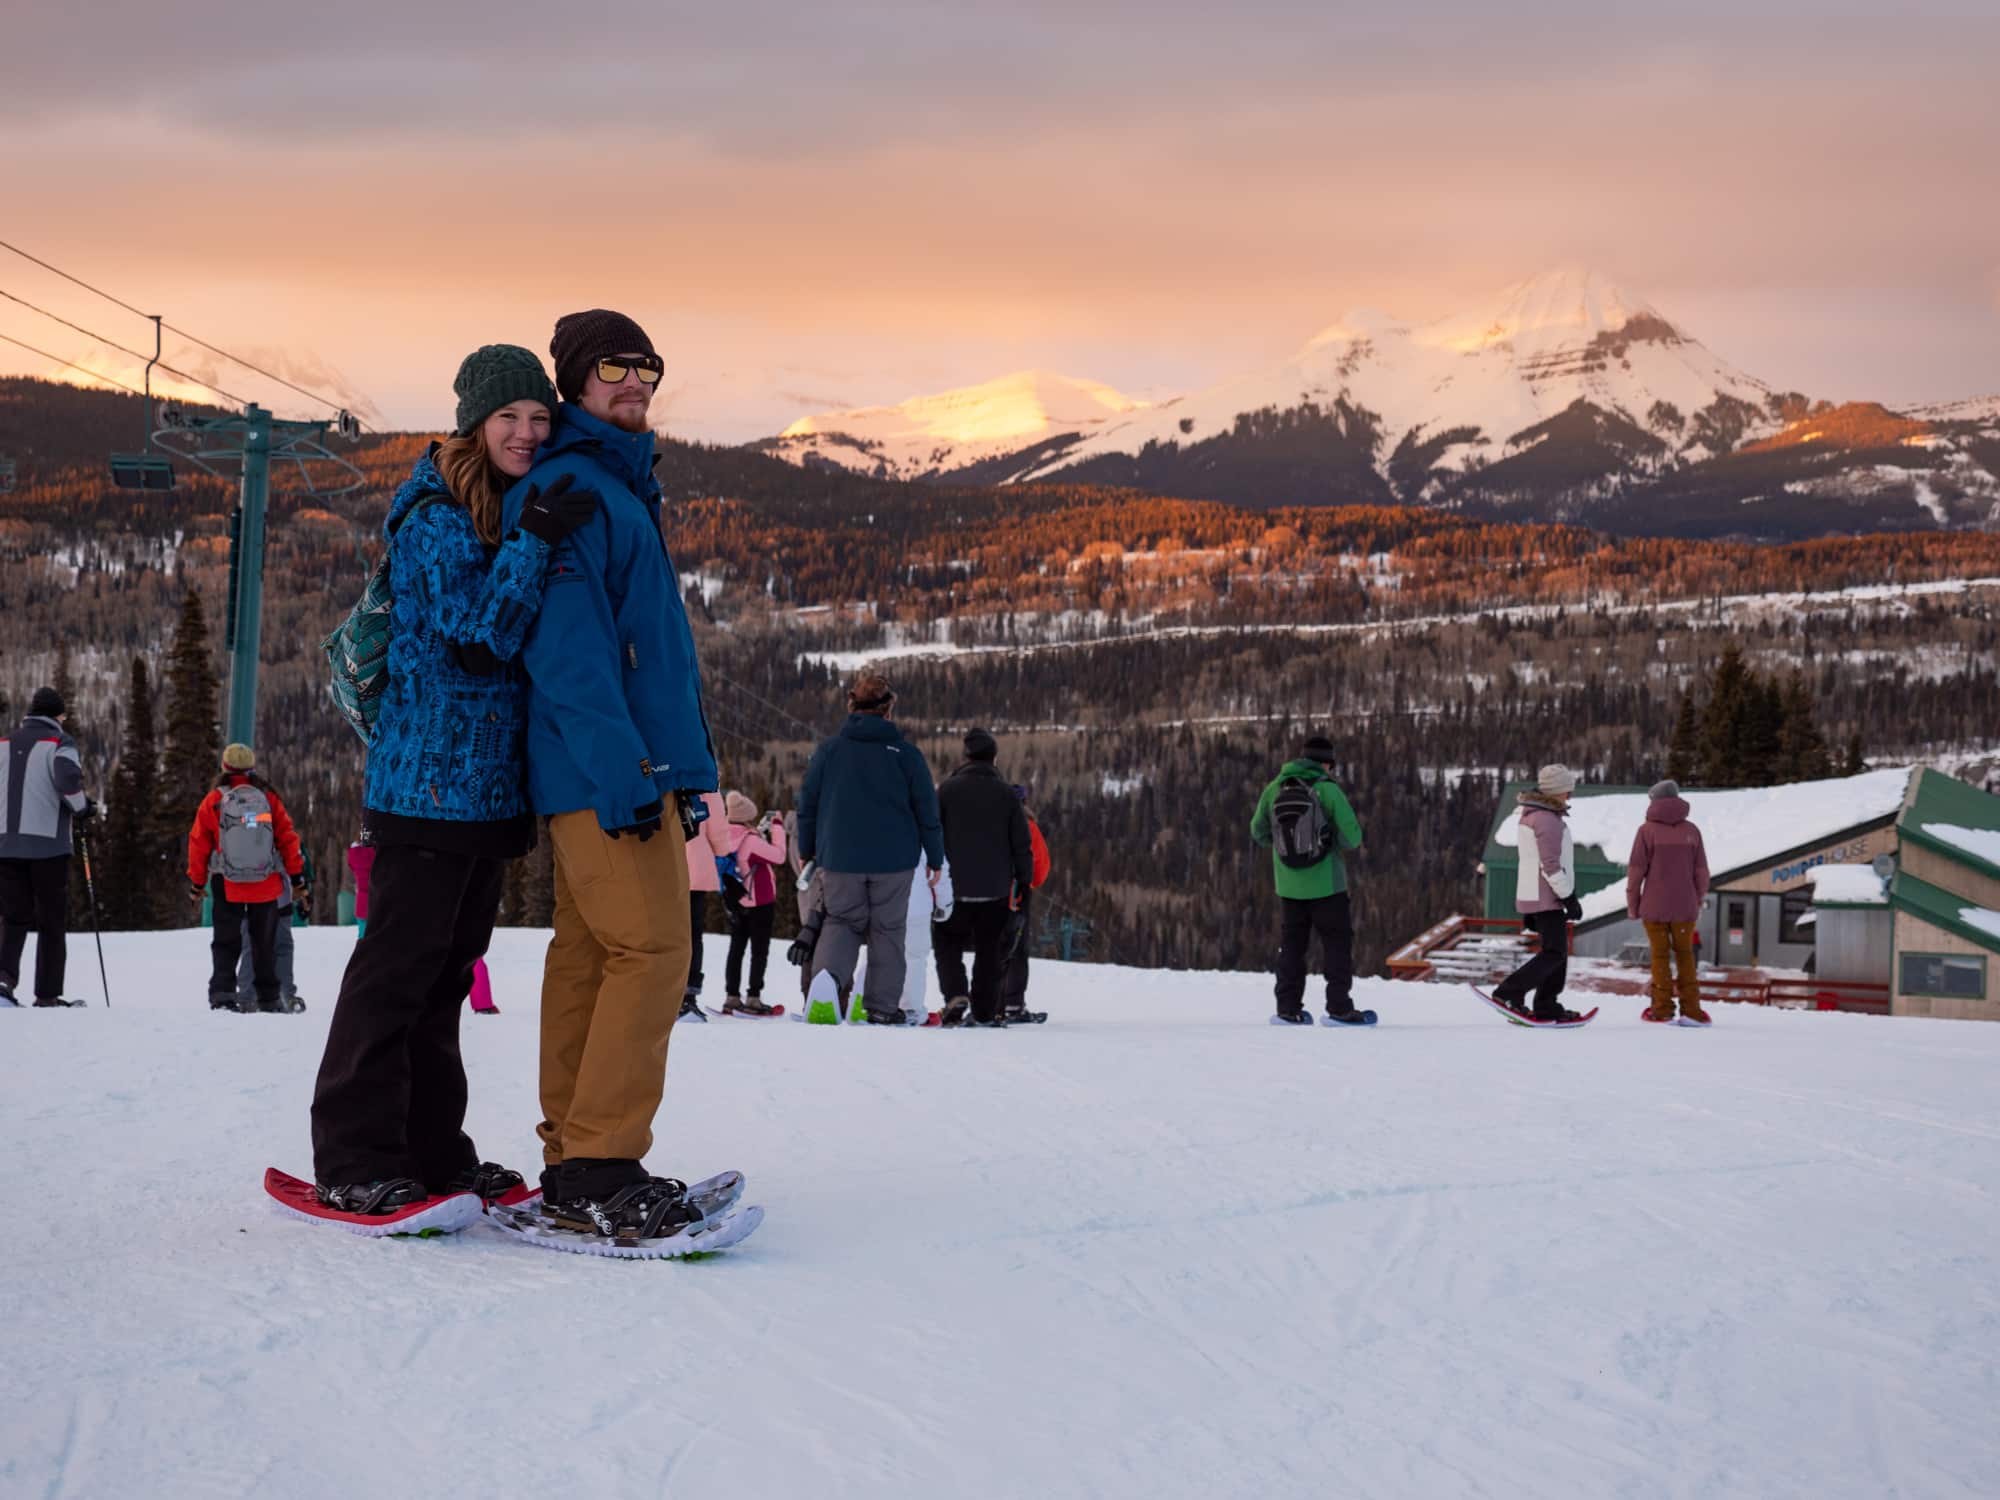 Young couple on snowshoe tour stops to take in the alluring sunset views